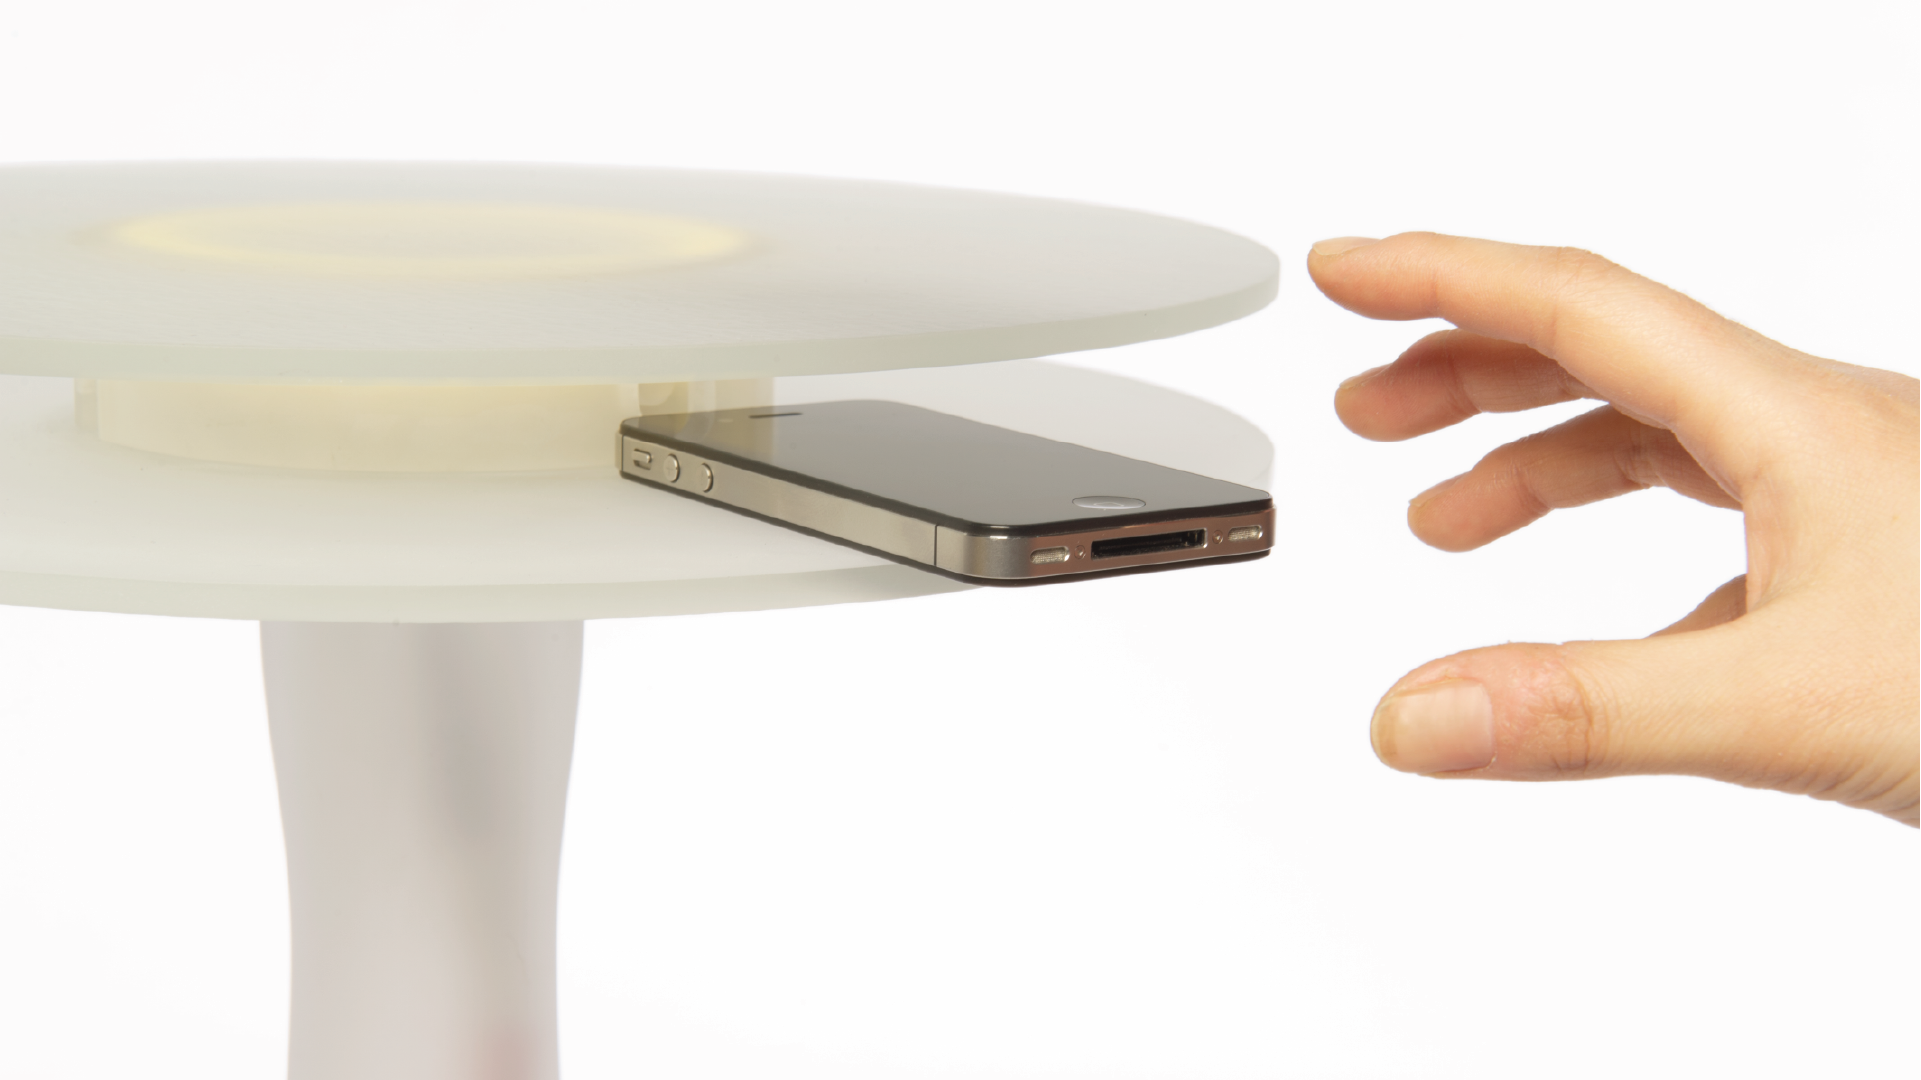 Detail shot of the side table holding a phone in between the two disks